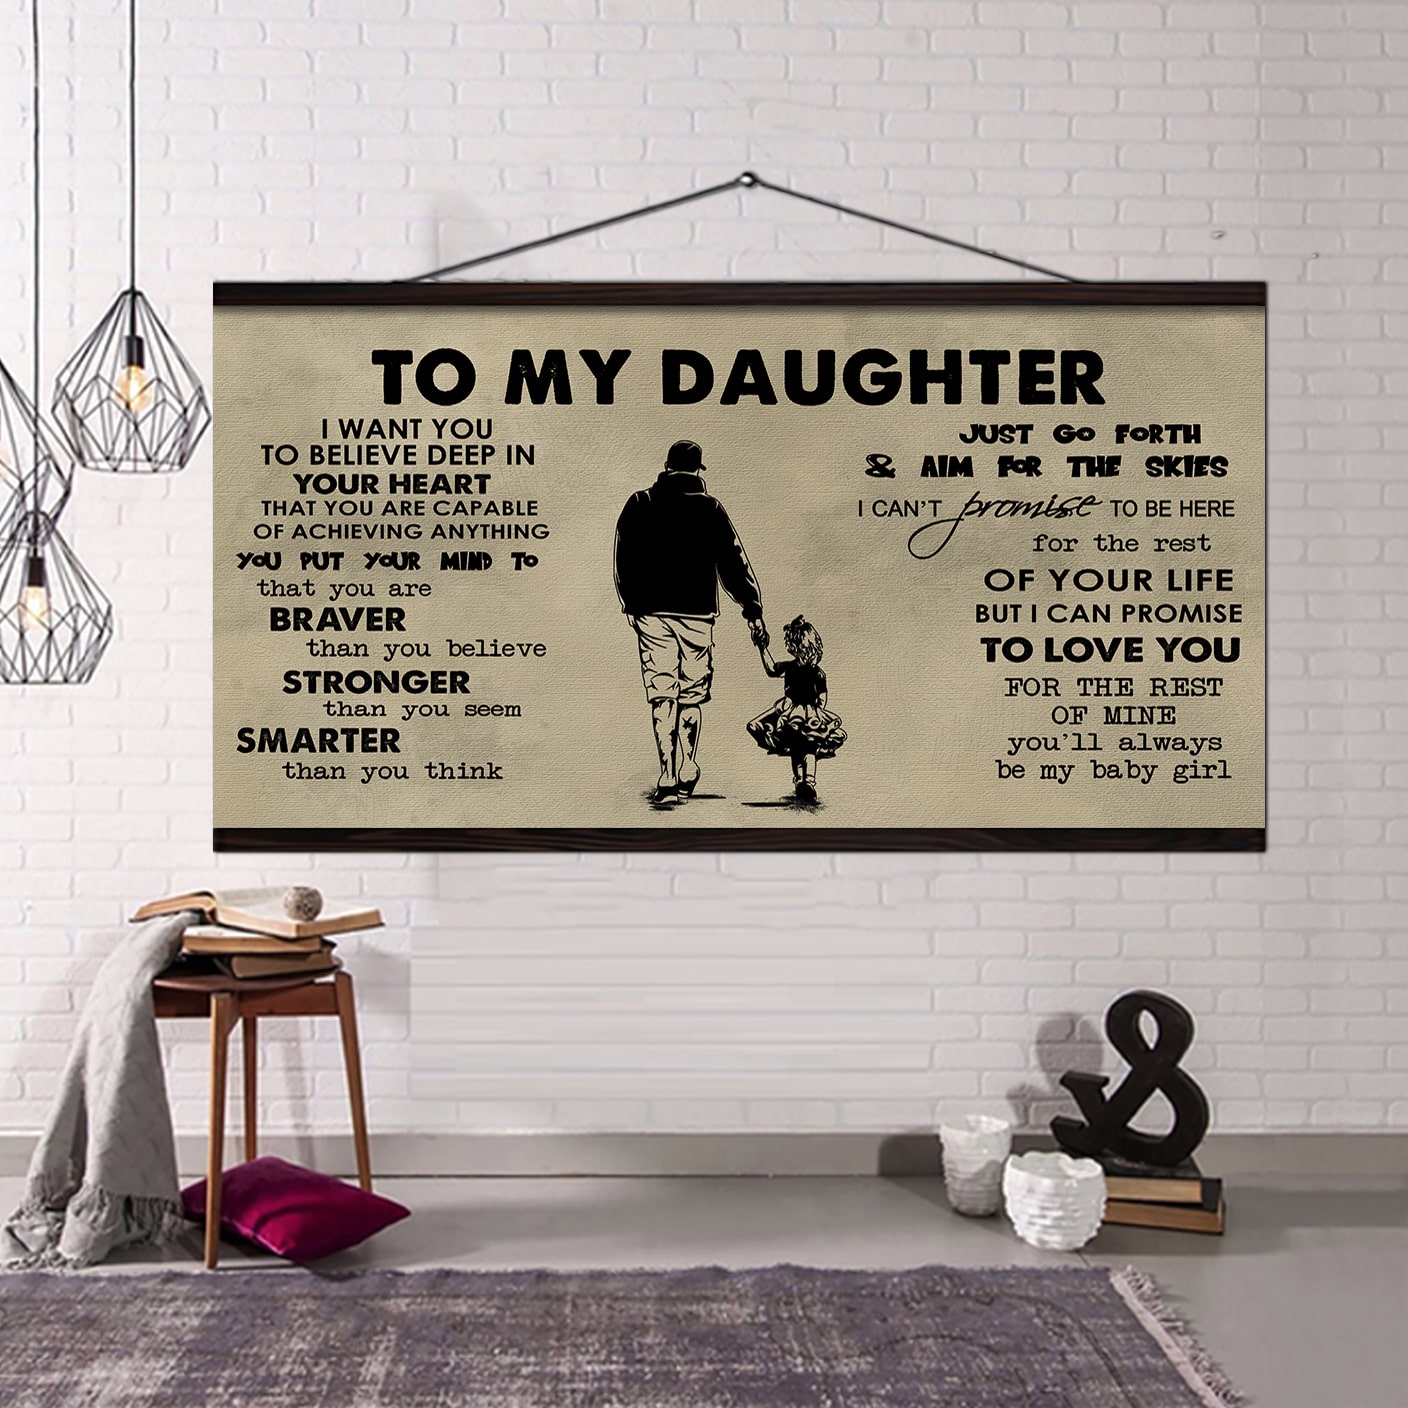 BASKETBALL TO MY SON- I WANT YOU TO BELIEVE- CANVAS POSTER